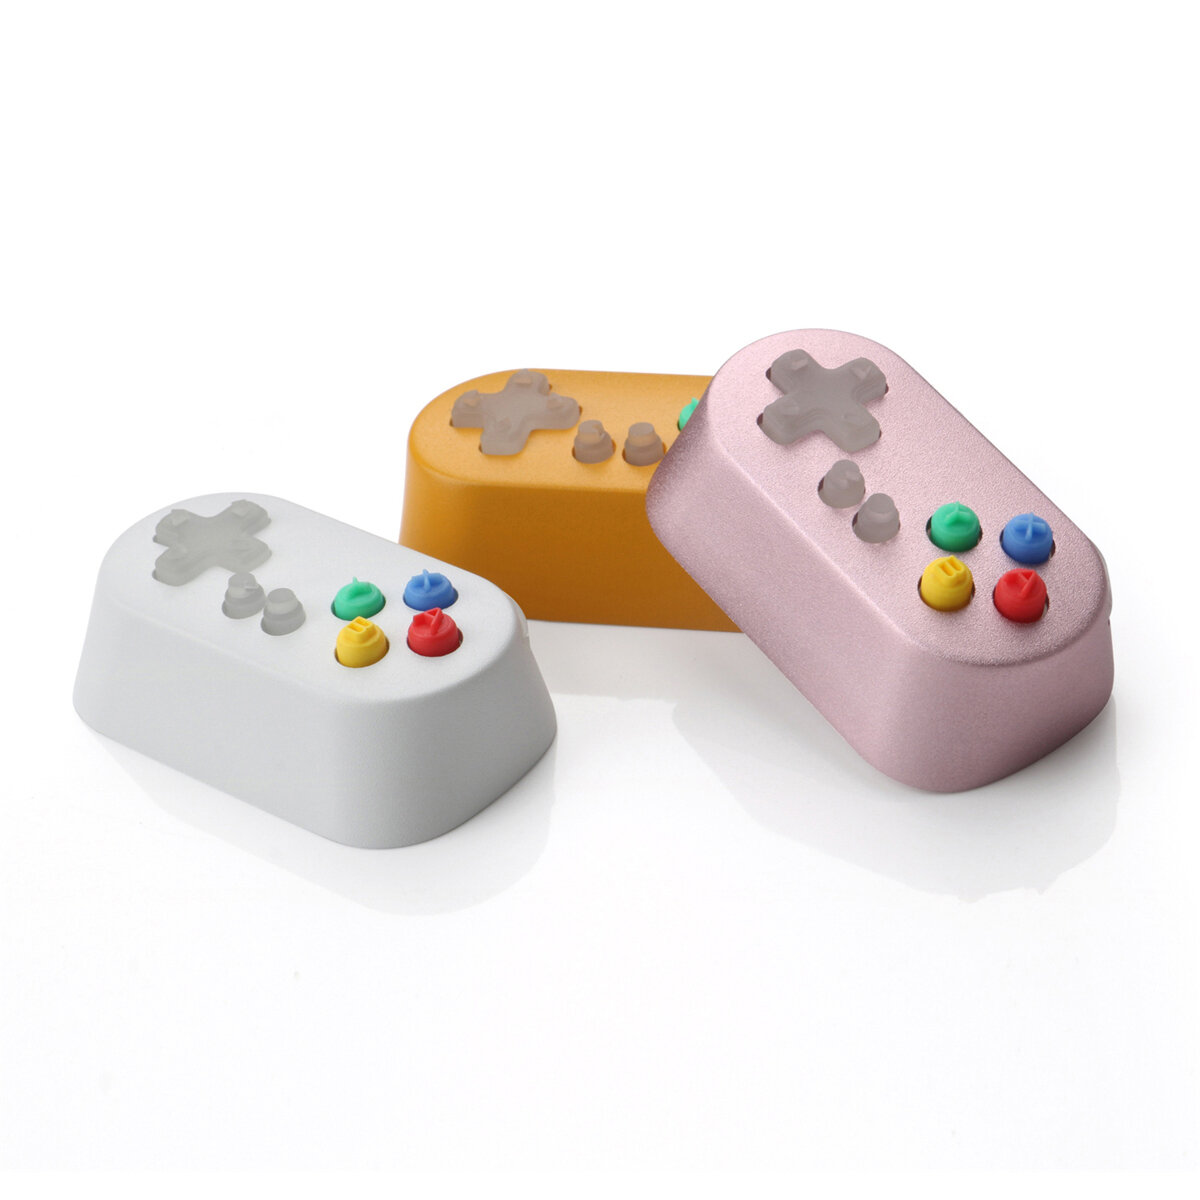 HolyOOPS CAPSLOCK Keycap Game Console Handle Shape 1.75u 6063 Aluminum Alloy Shell Silica Gel Buttons for Mechanical Key